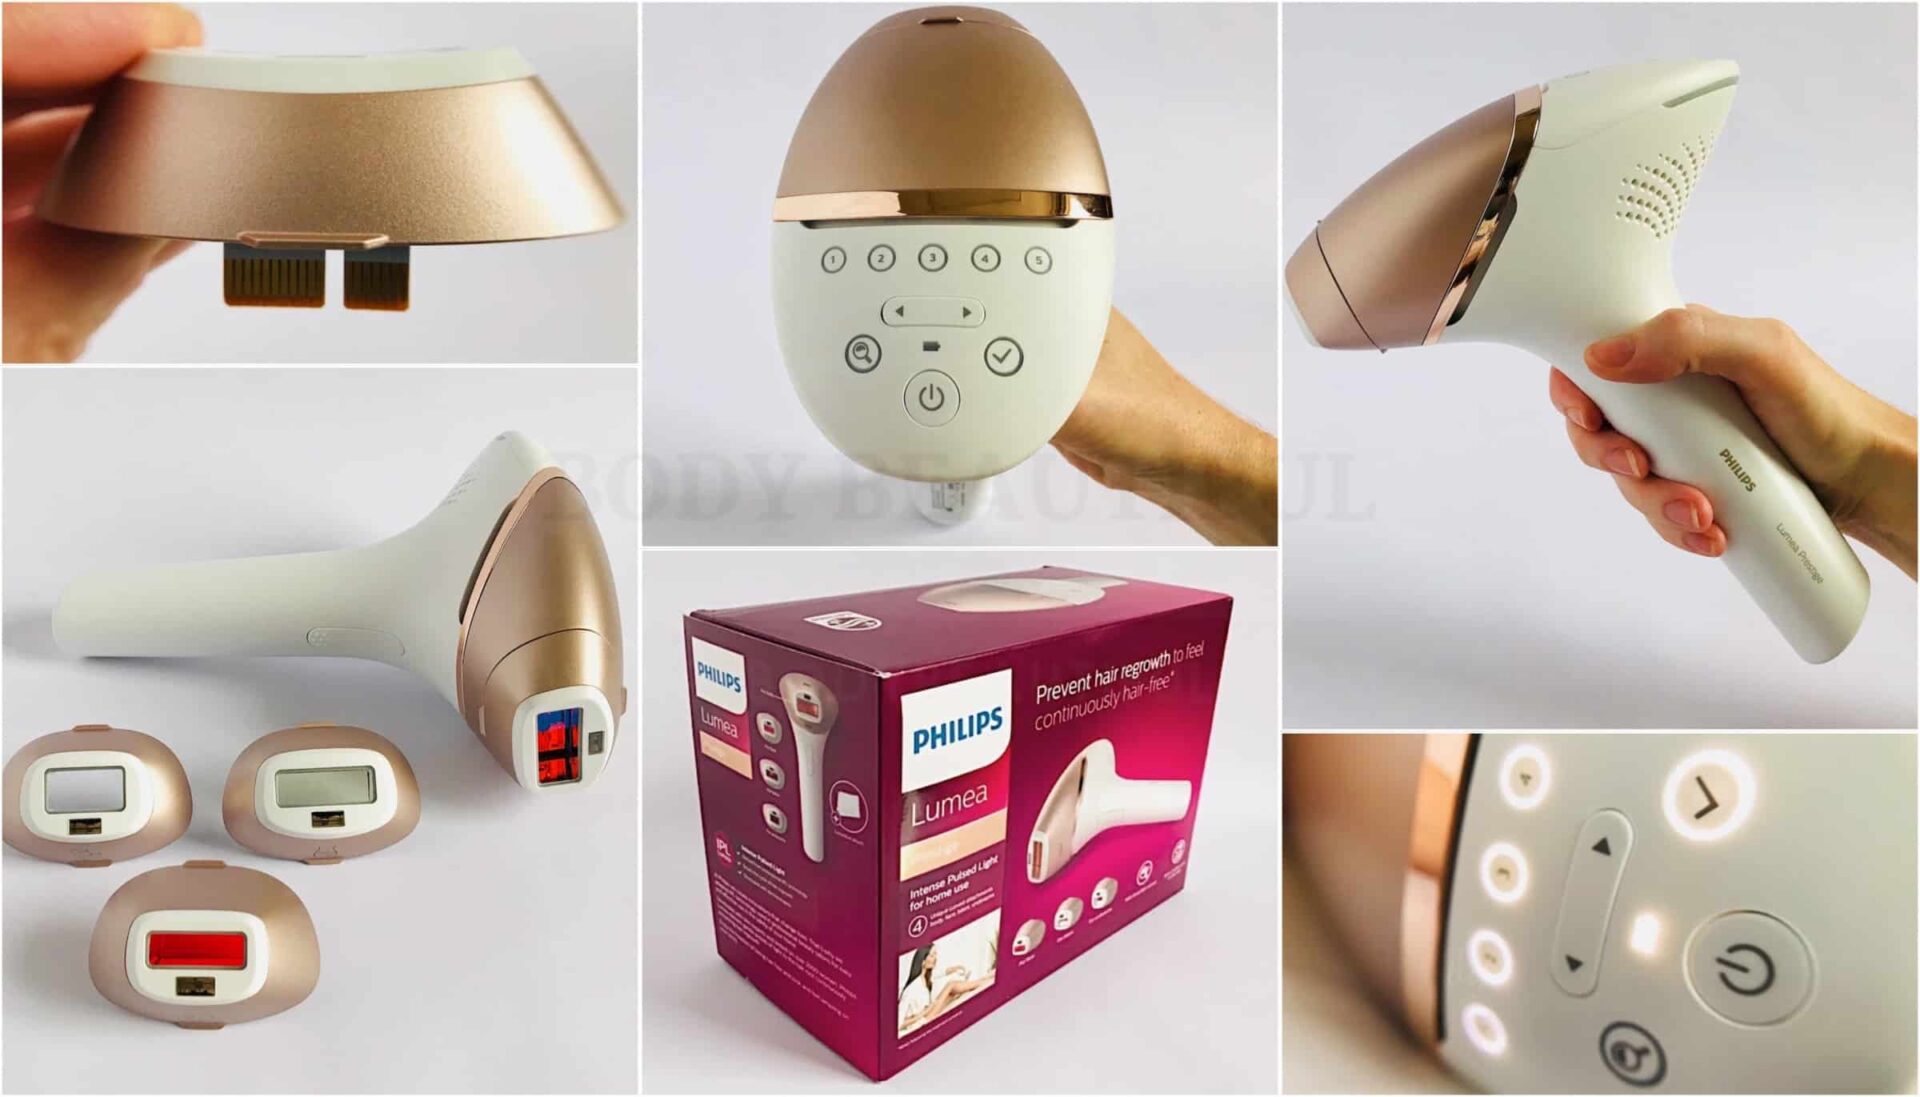 tobacco Be surprised Explicit Tried-&-tested Philips Lumea Prestige review & summary video